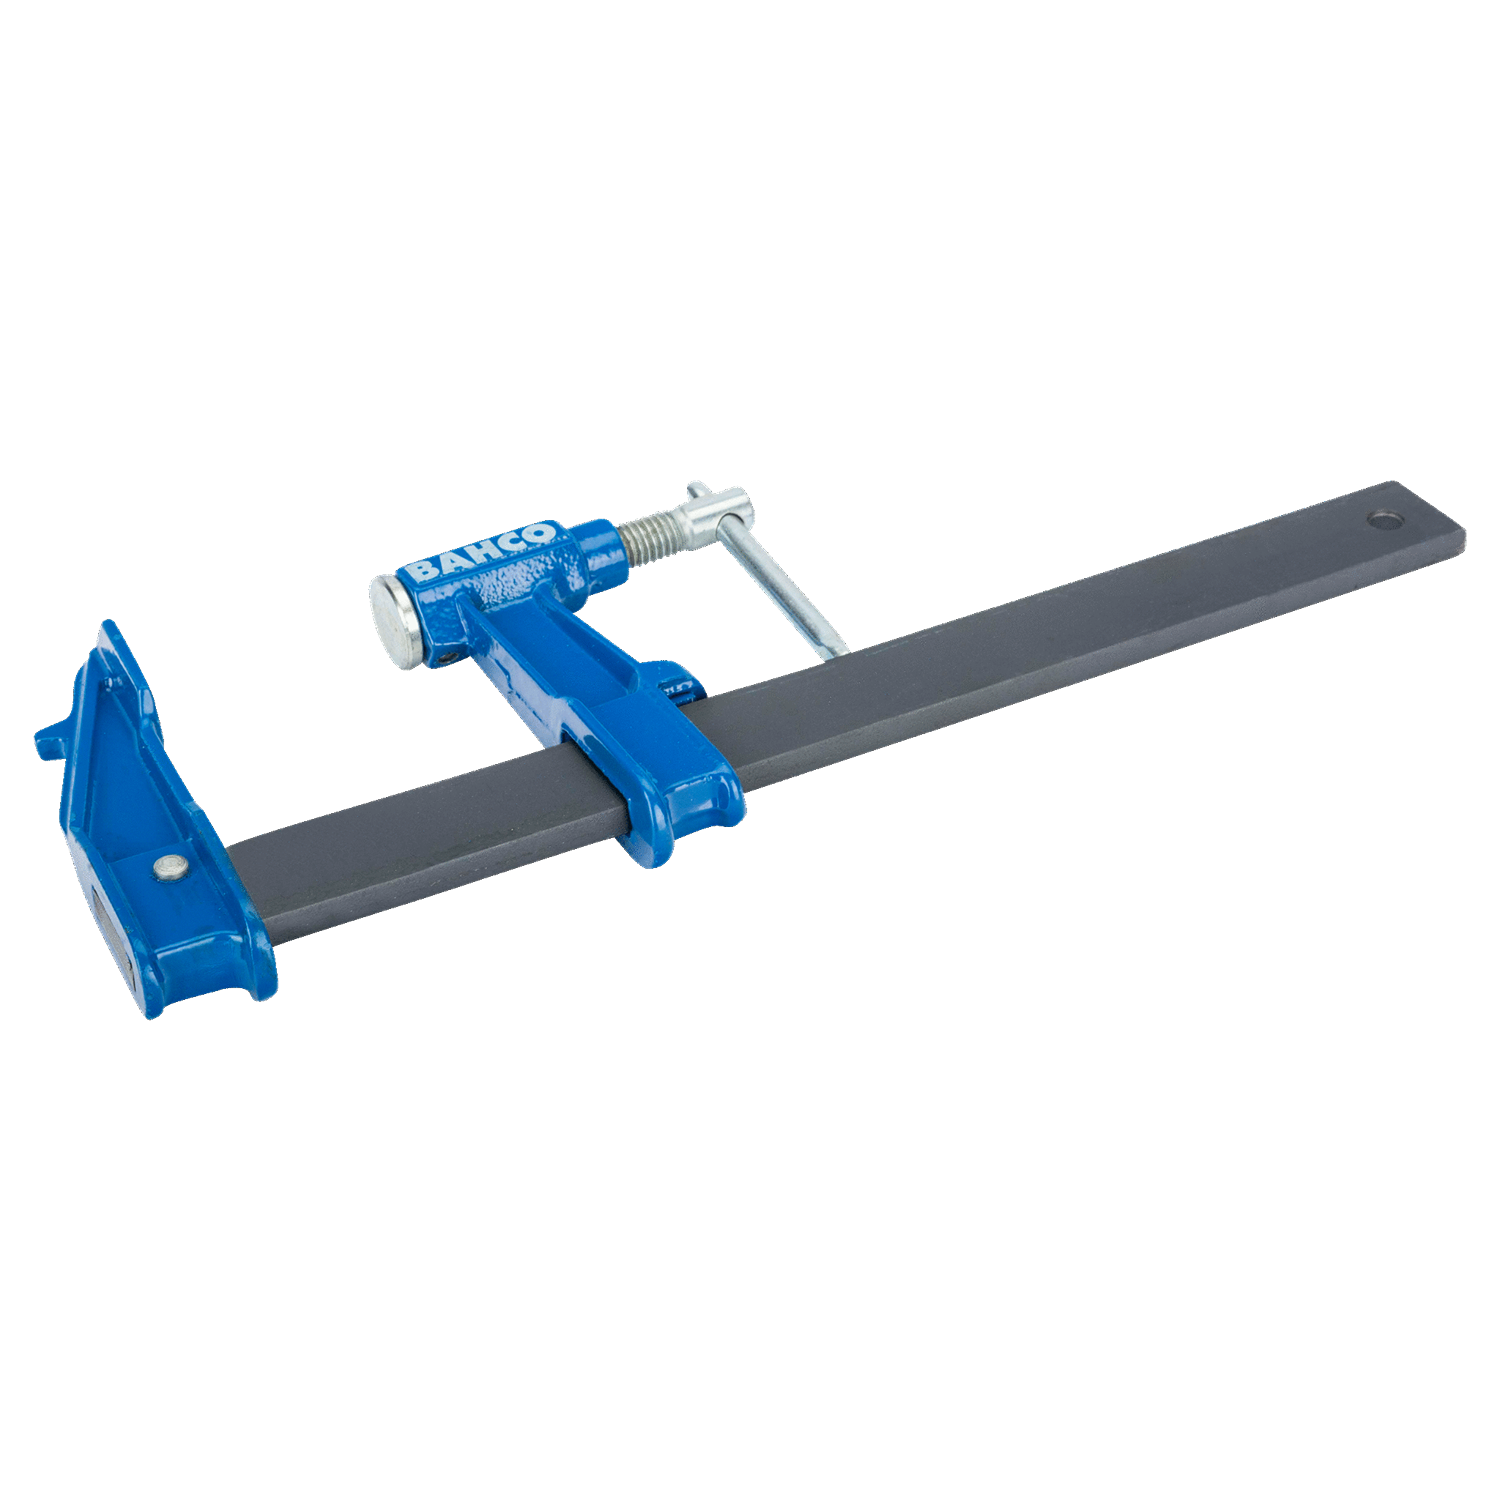 BAHCO 3066 F-Clamp with Steel T-Handle 90 mm (BAHCO Tools) - Premium F-Clamp from BAHCO - Shop now at Yew Aik.